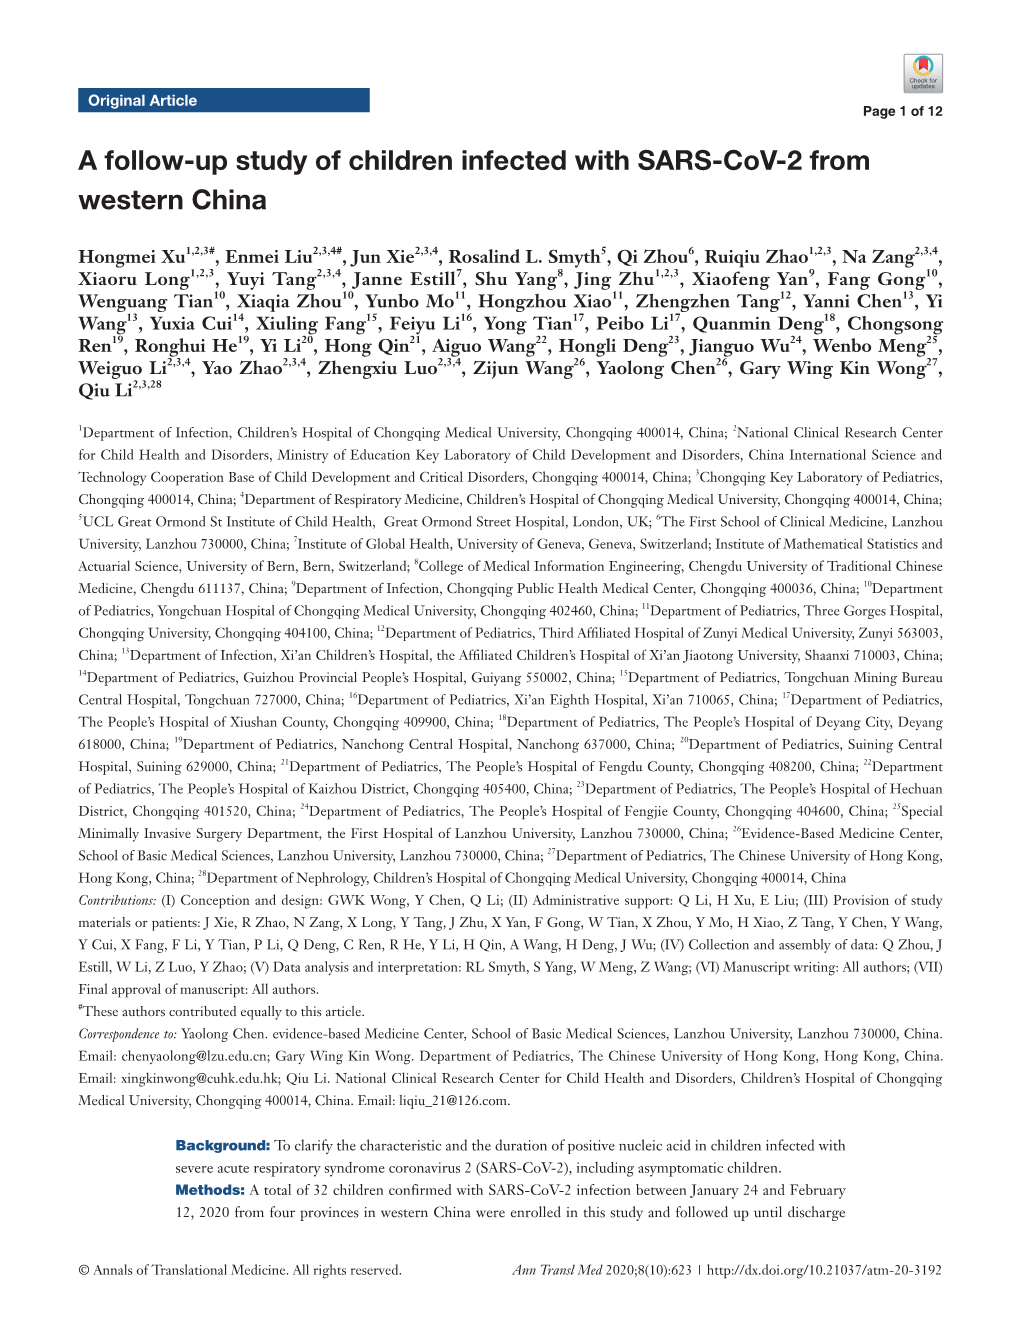 A Follow-Up Study of Children Infected with SARS-Cov-2 from Western China